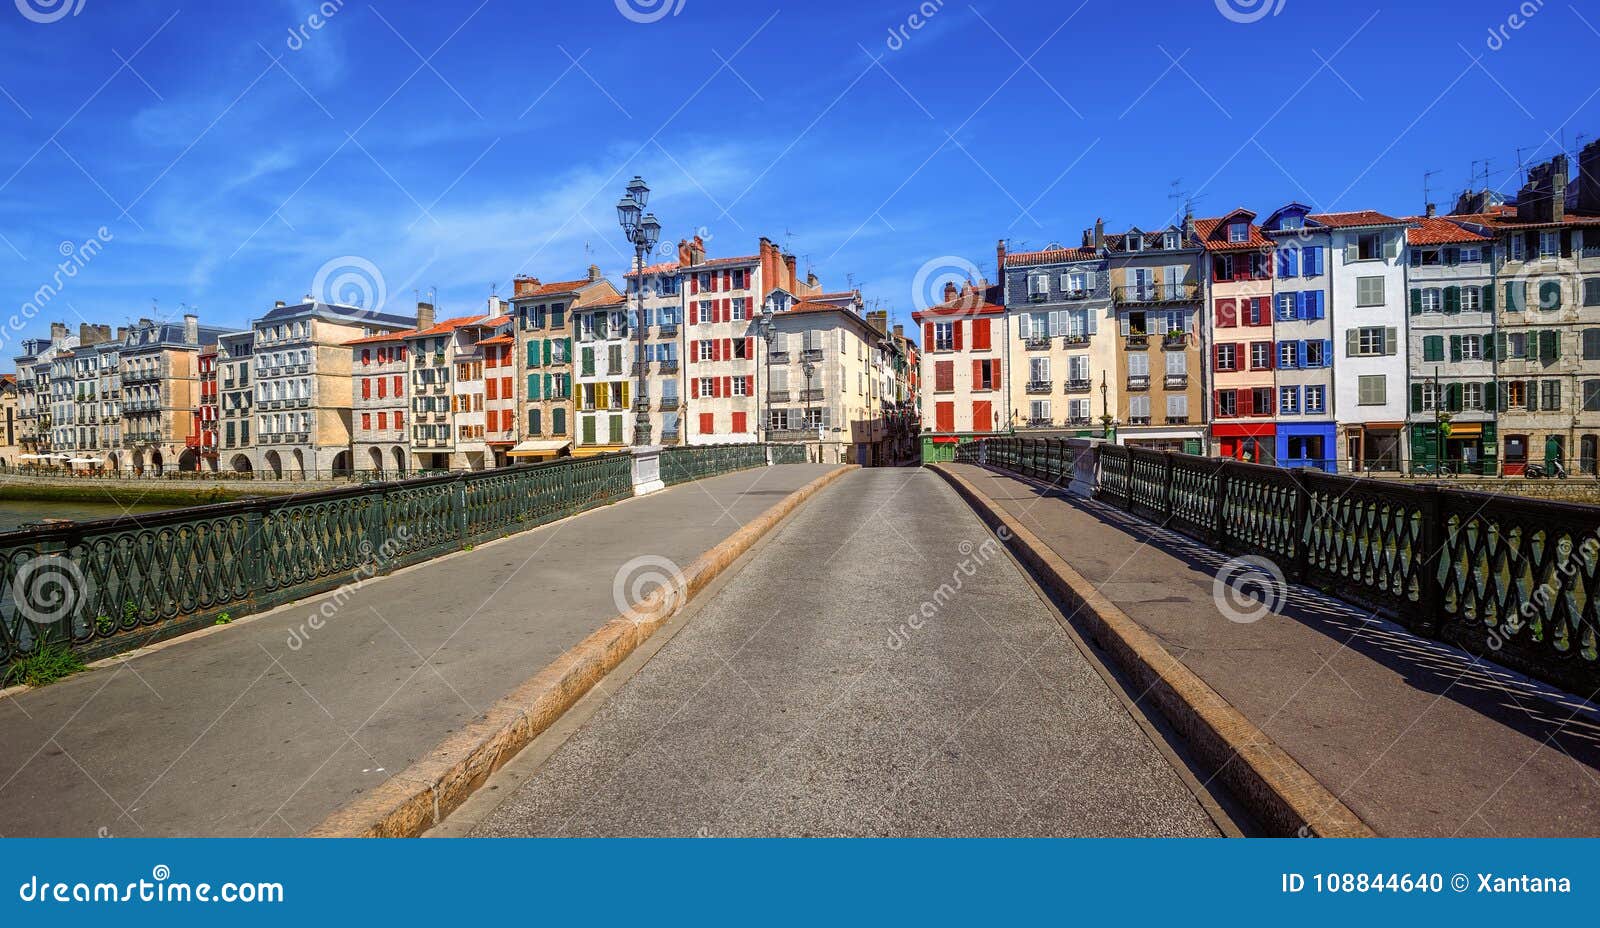 colorful houses in bayonne, basque country, france